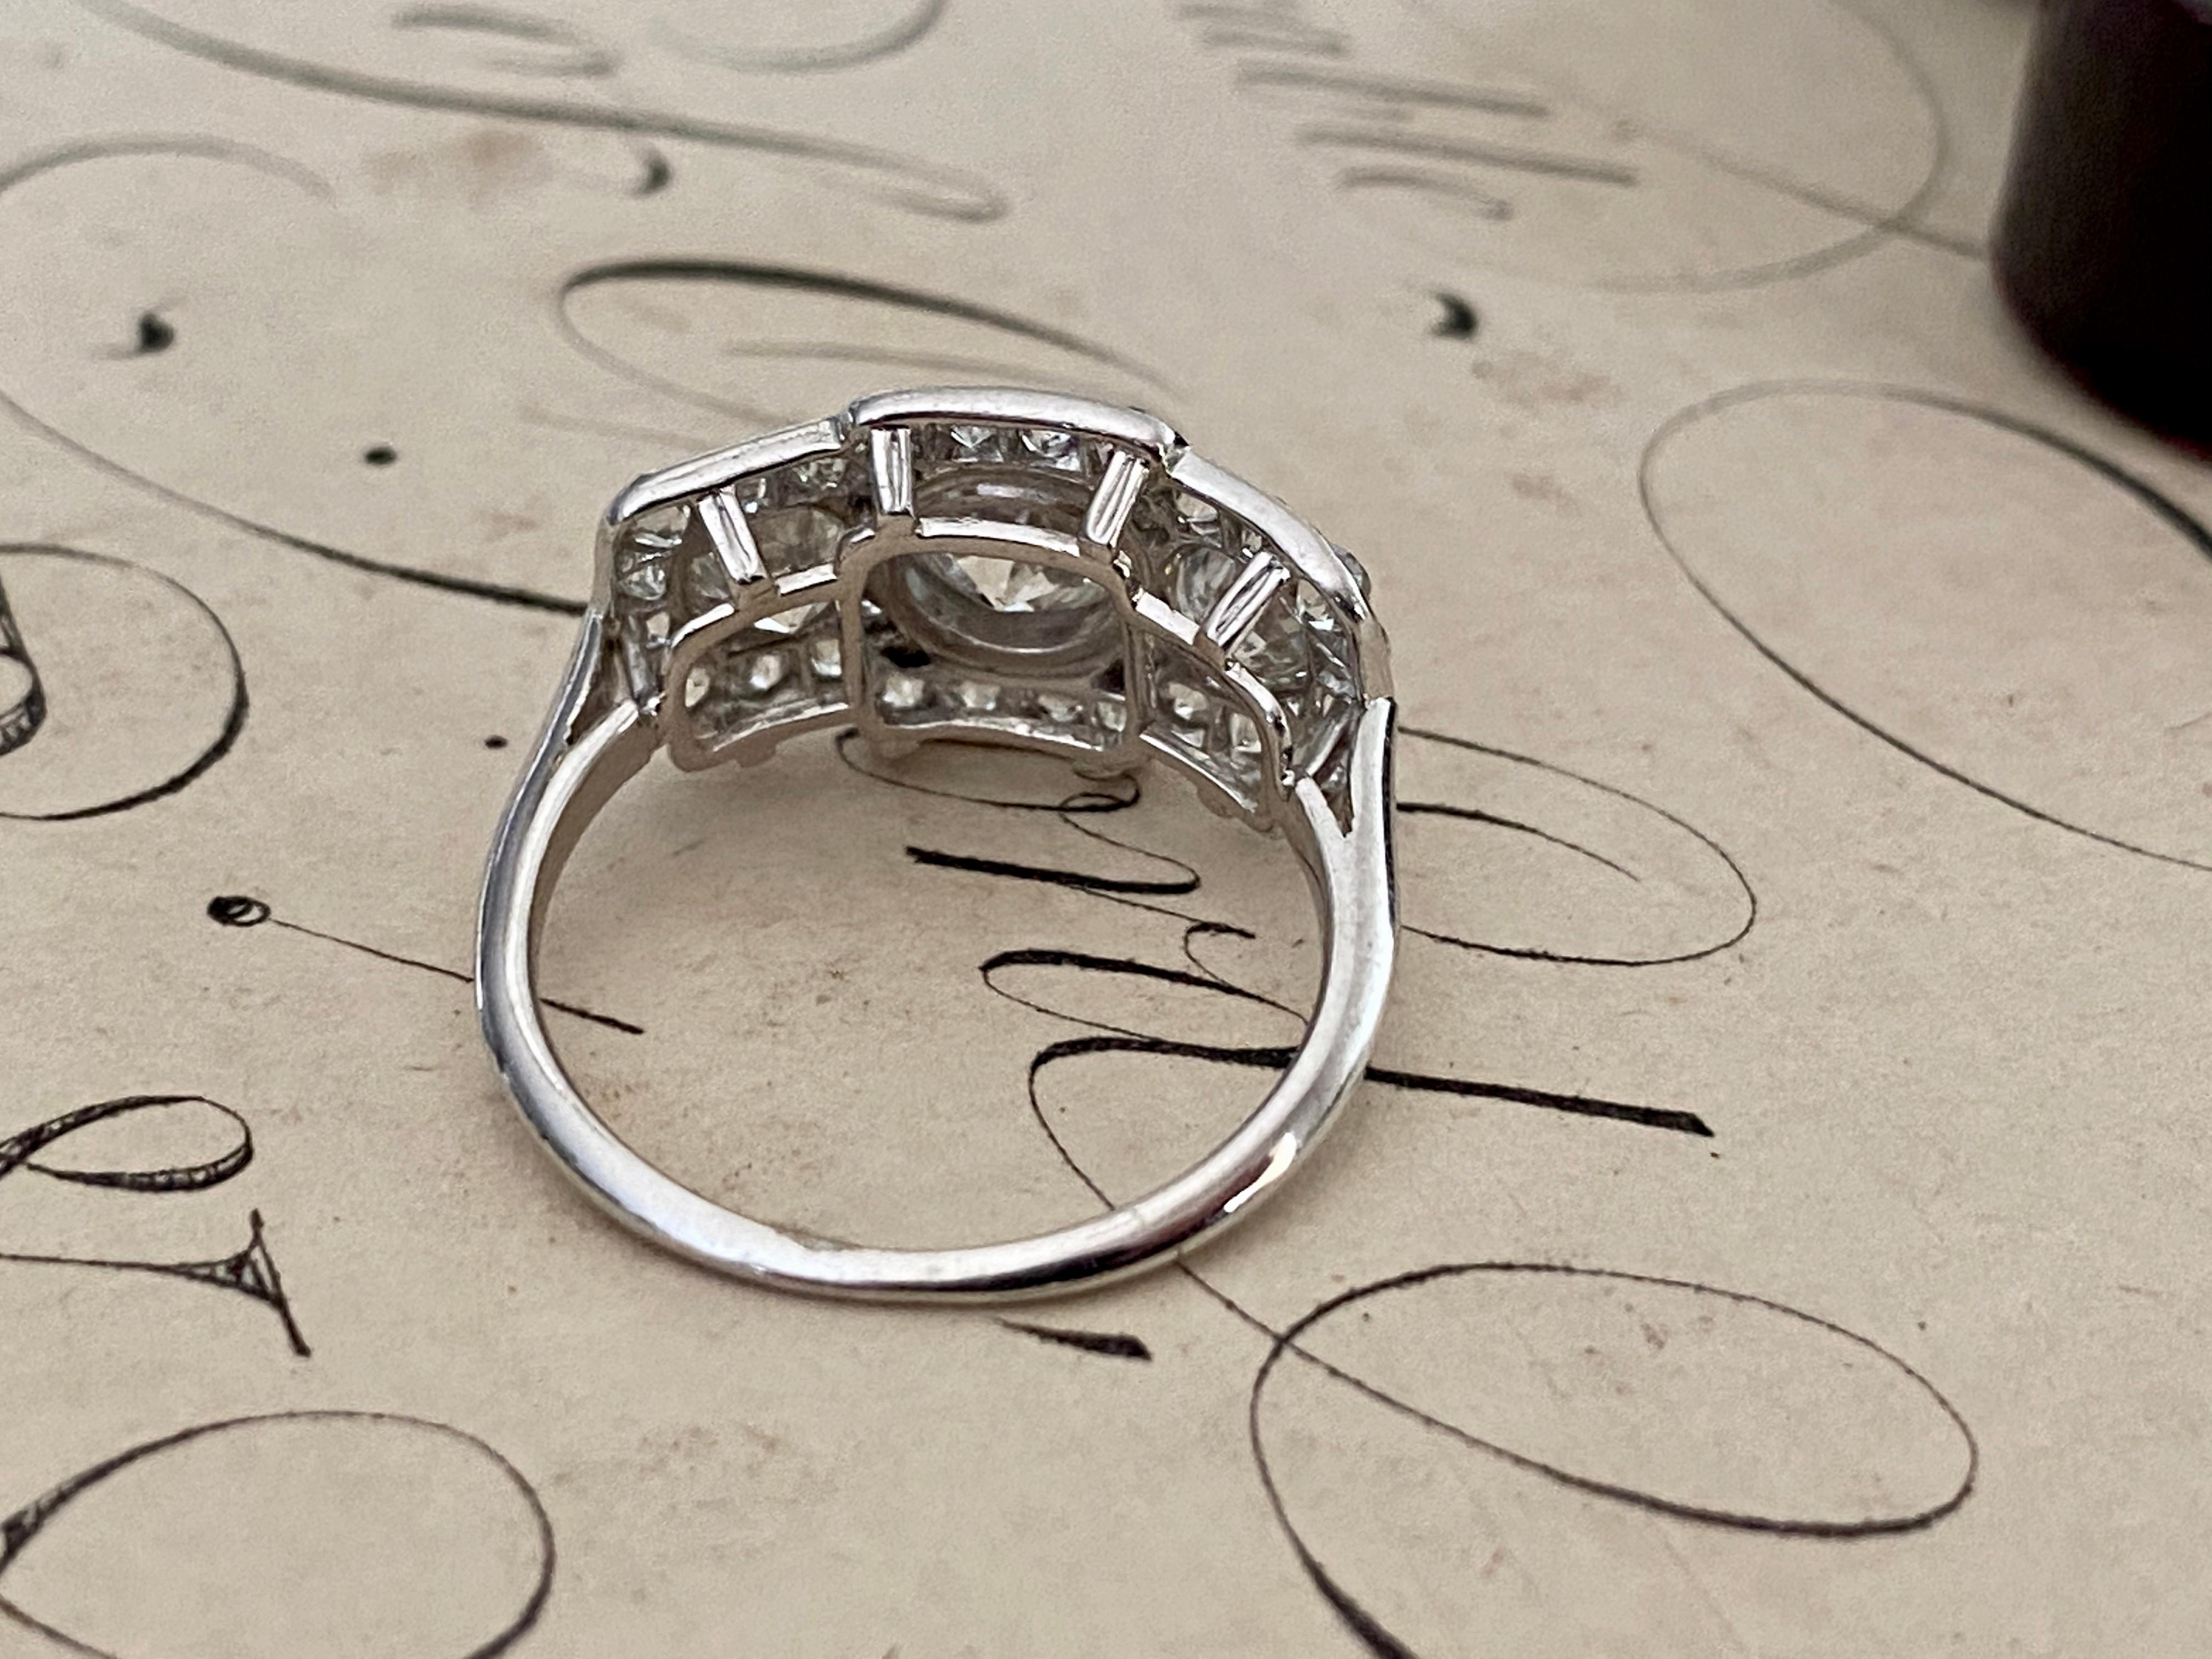 A trio of scintillating old European cut diamonds, together weighing 2.65 carats, flash across the face of this streamlined Edwardian / Art Deco finger hugger. Expertly crafted in platinum, three sparkling diamonds radiate from within a twinkling